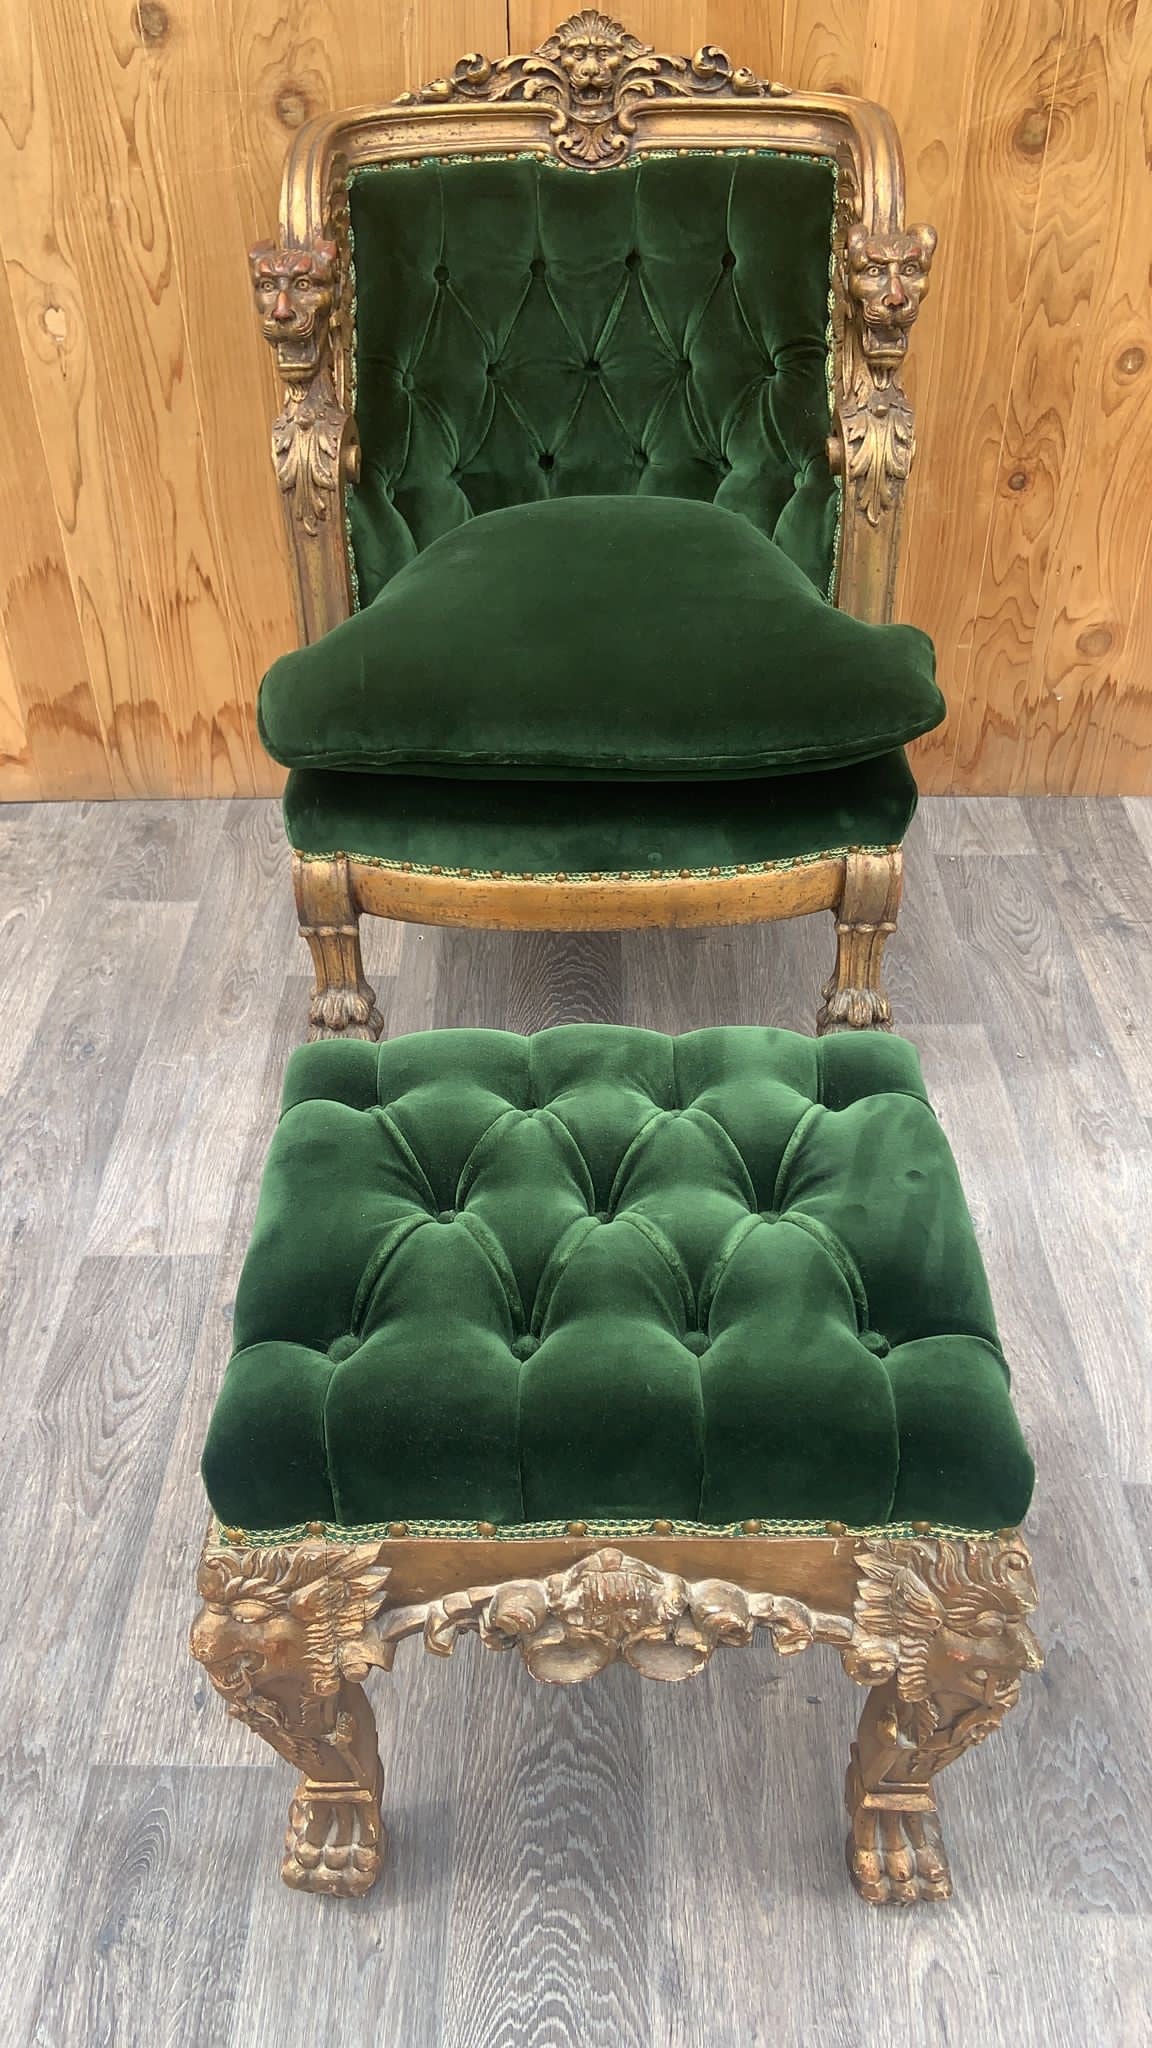 Antique French Renaissance Carved & Gilded Figural Winged Griffen Arm Chair and Ottoman Newly Upholstered In Plush "Emerald" - Set of 2